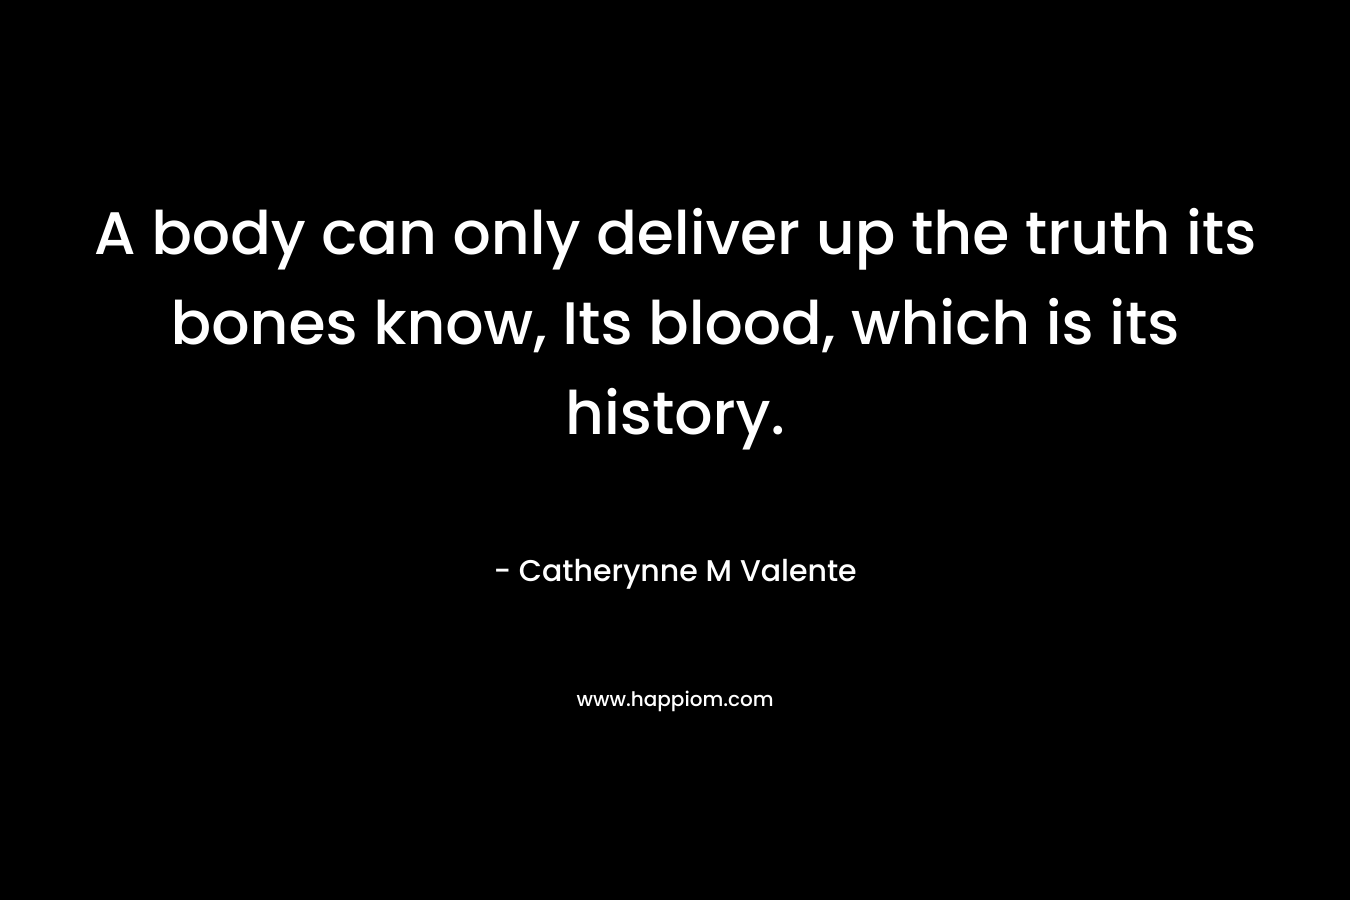 A body can only deliver up the truth its bones know, Its blood, which is its history.